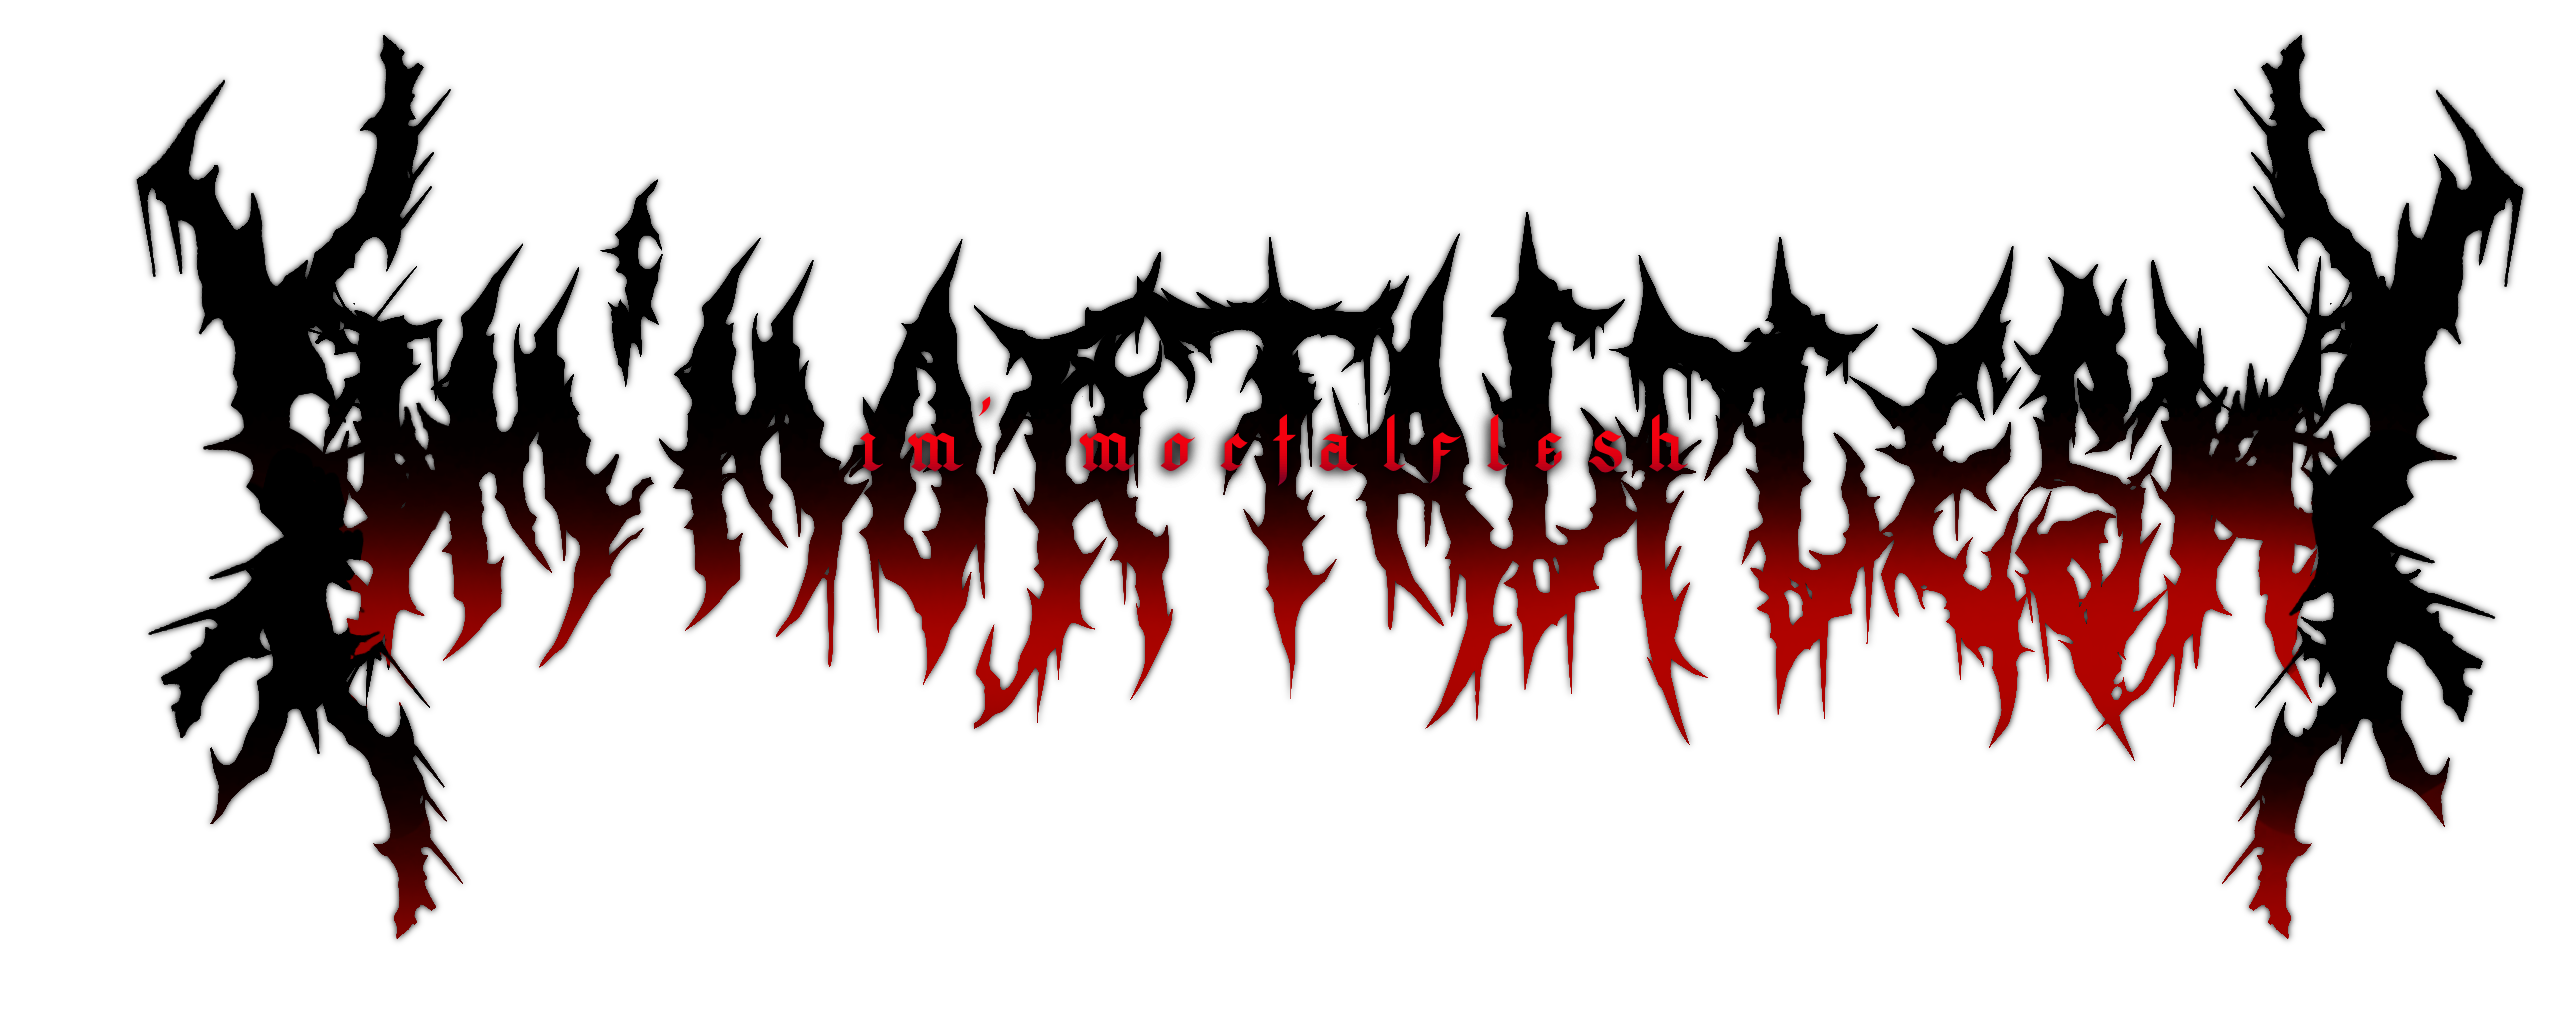 immortalflesh%20official%20title.png